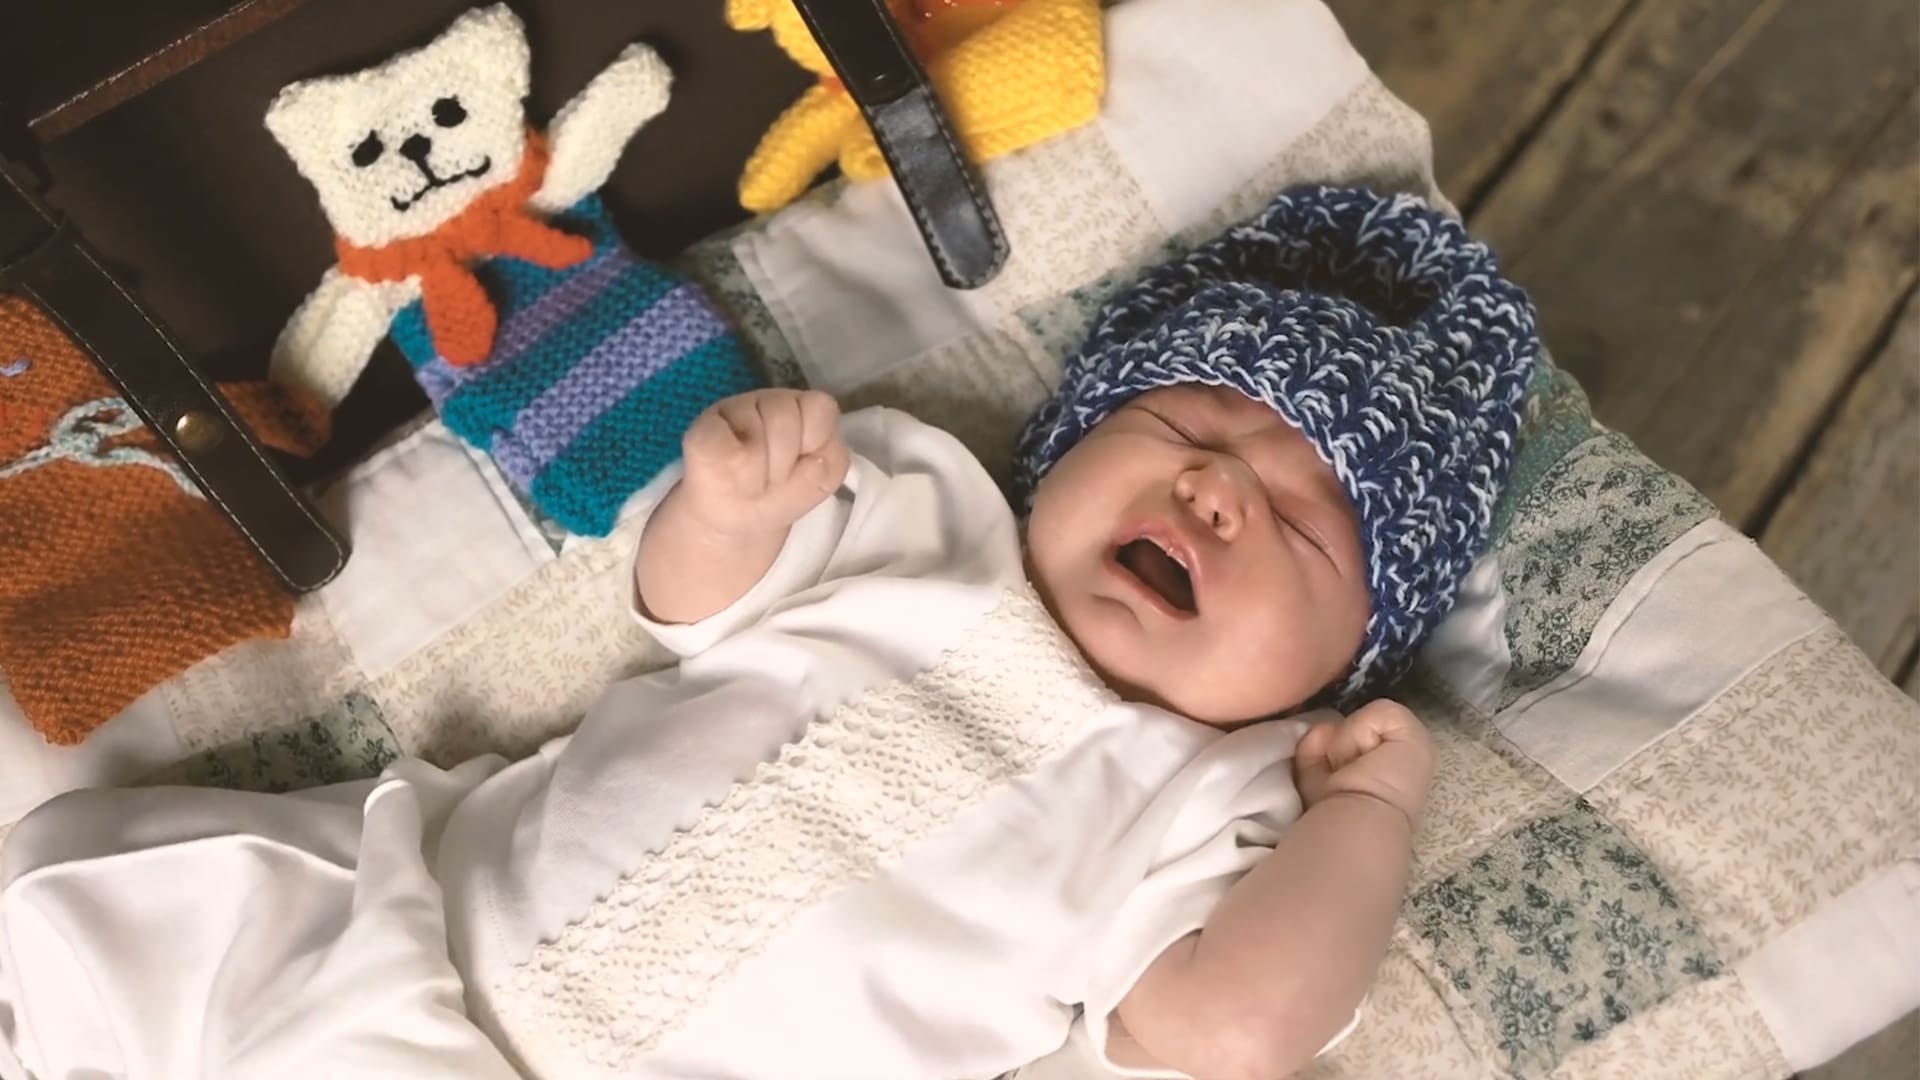 A screengrab of an advertisement depicting a crying baby dressed in white and a blue knitted hat laying on a white patch blanket. The view is from above.